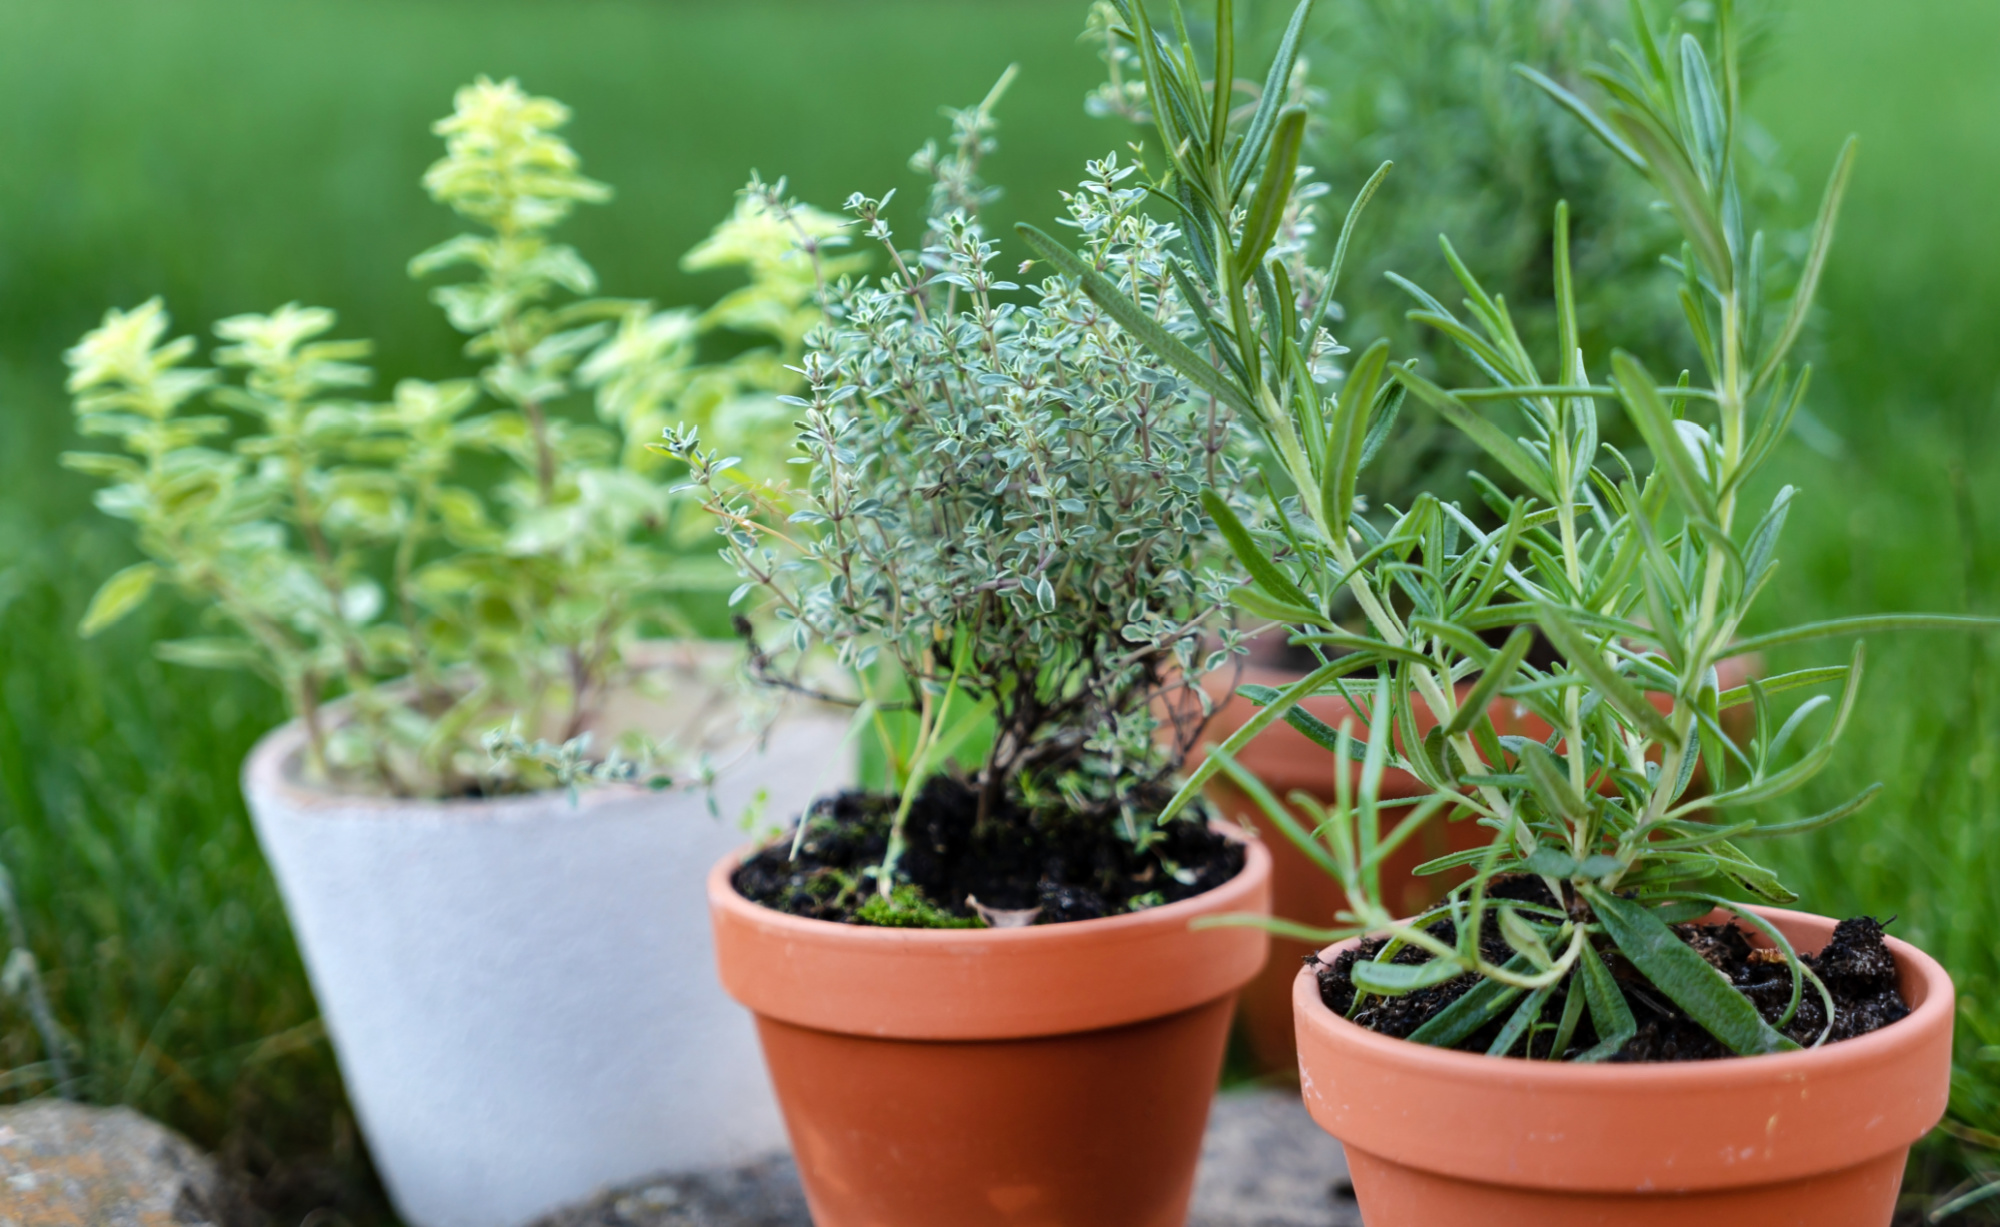 How to Start an Herb Garden: Tips for First-Time Gardeners.